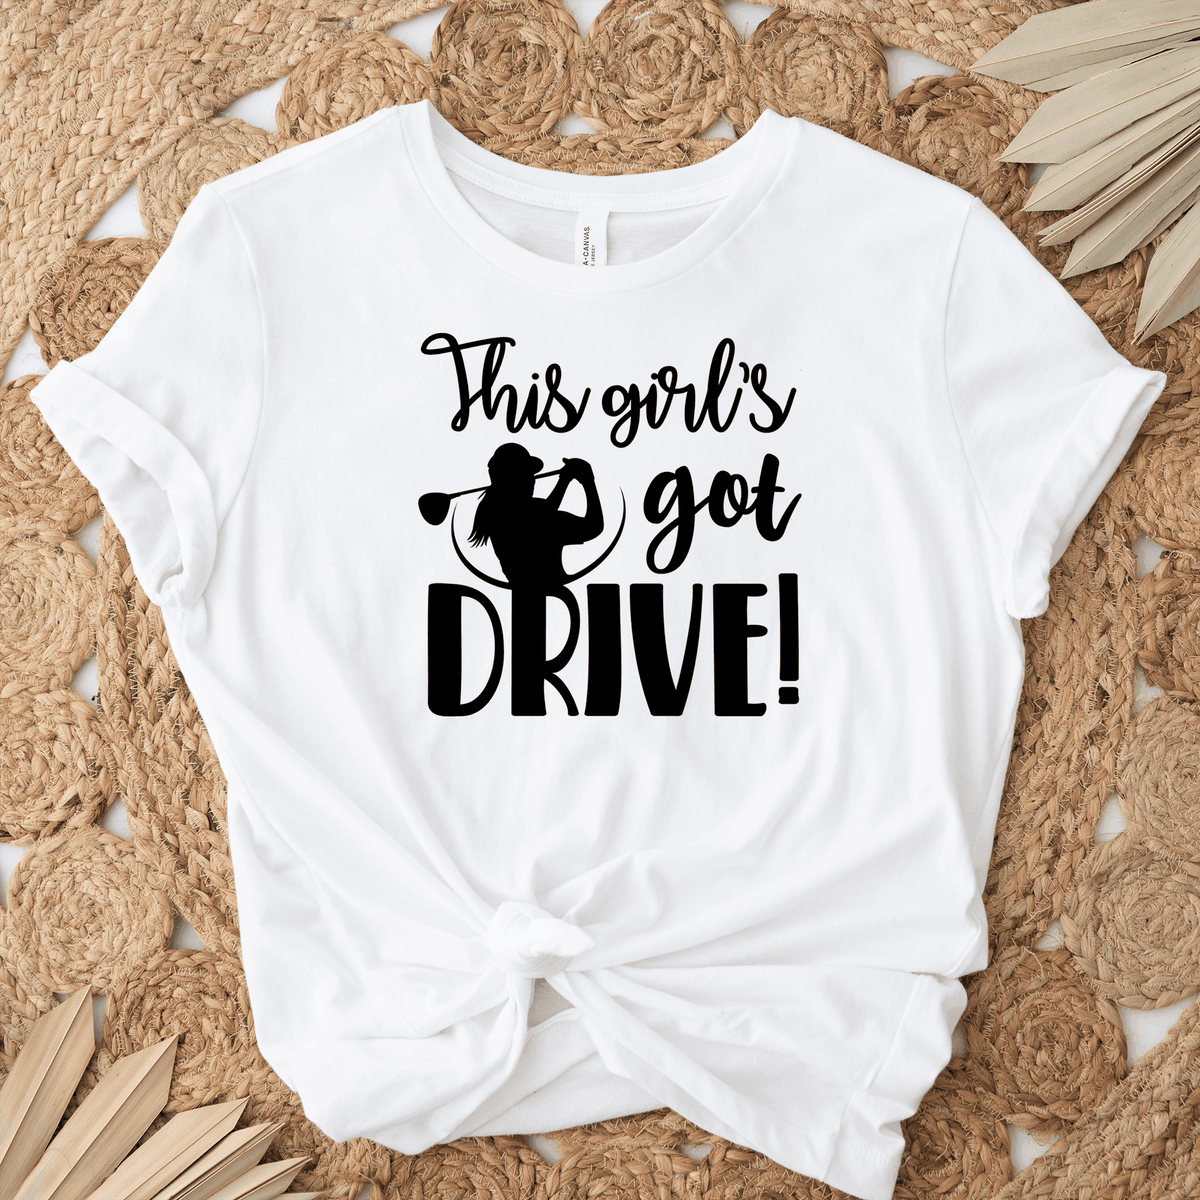 Womens White T Shirt with This-Girls-Got-Drive design